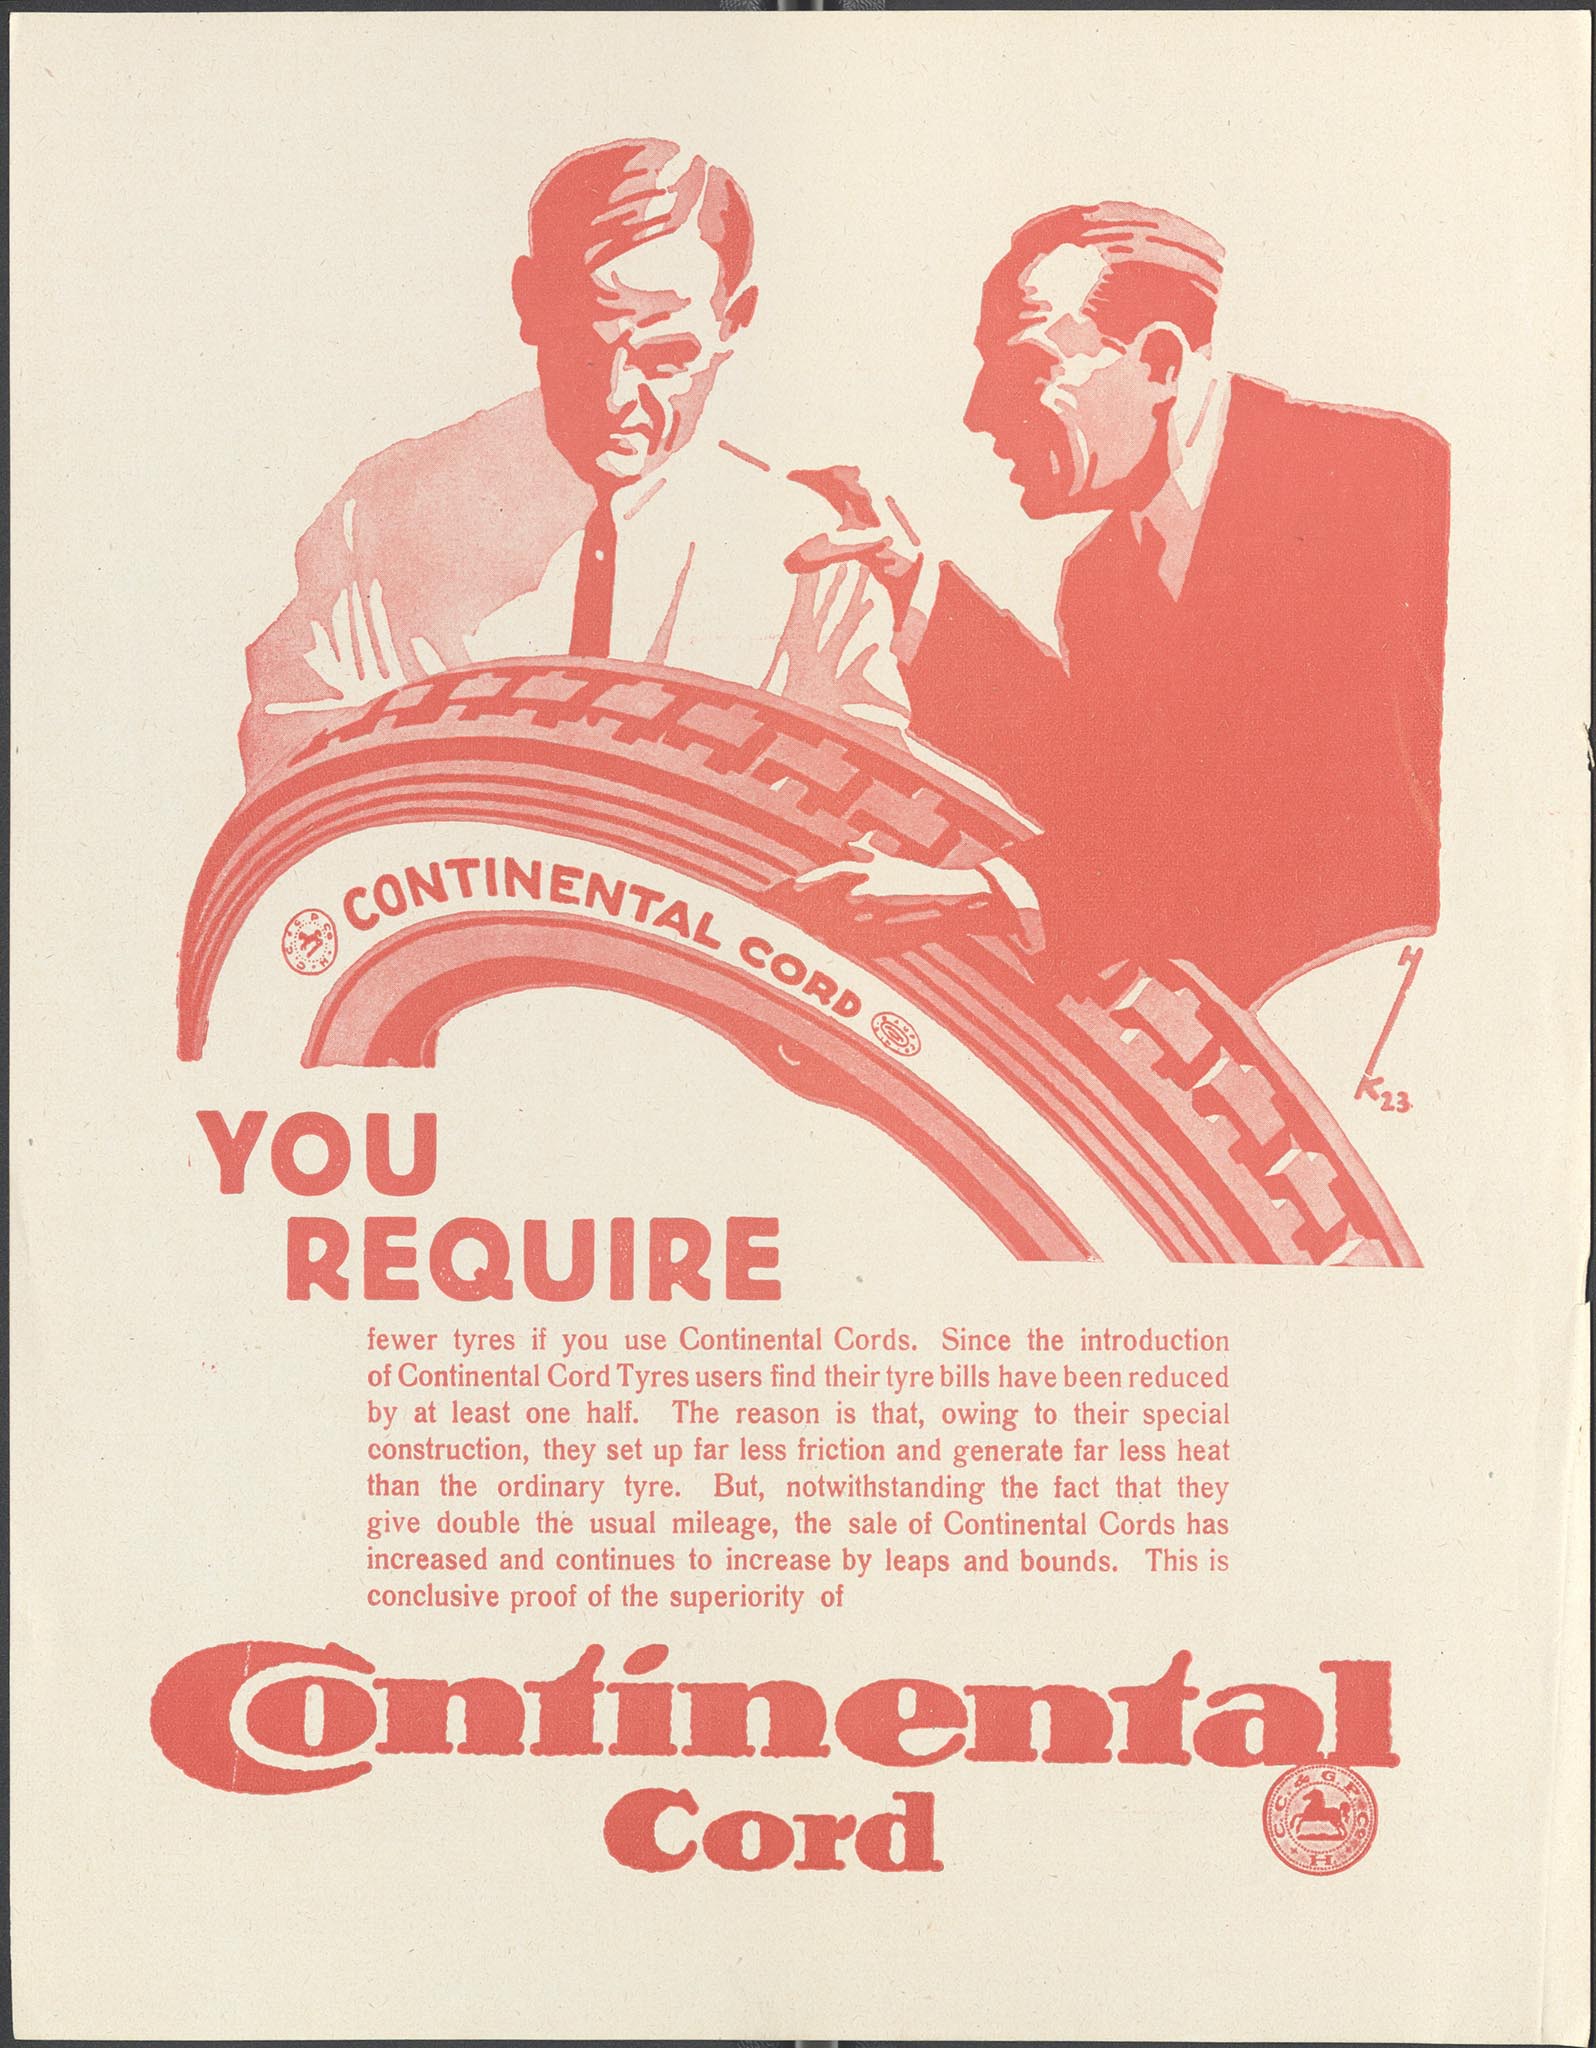 Advertising Continental Cord tyres began early 